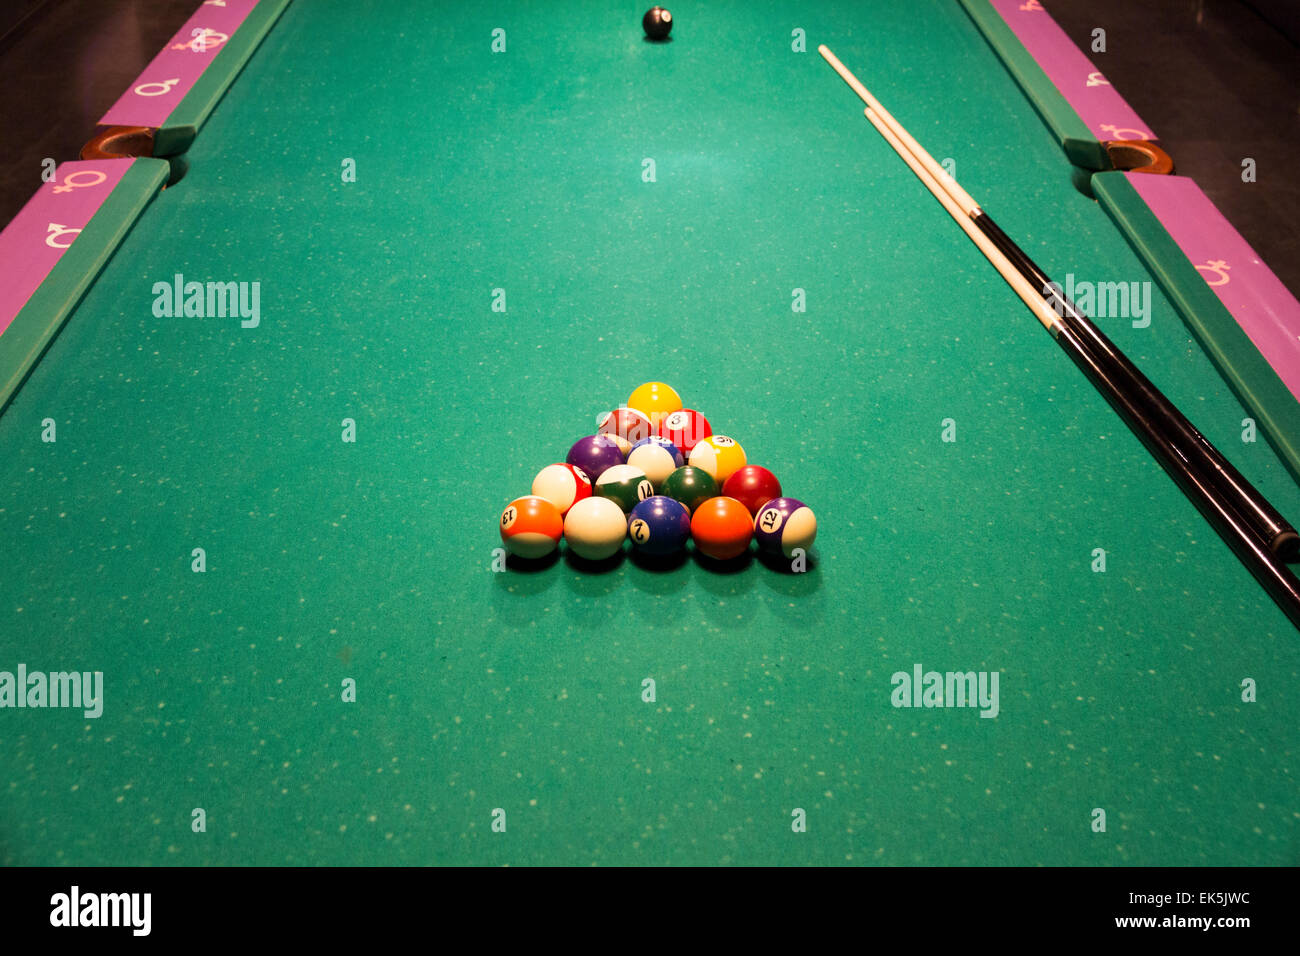 Pool table special design for teenagers with cues and balls Stock Photo